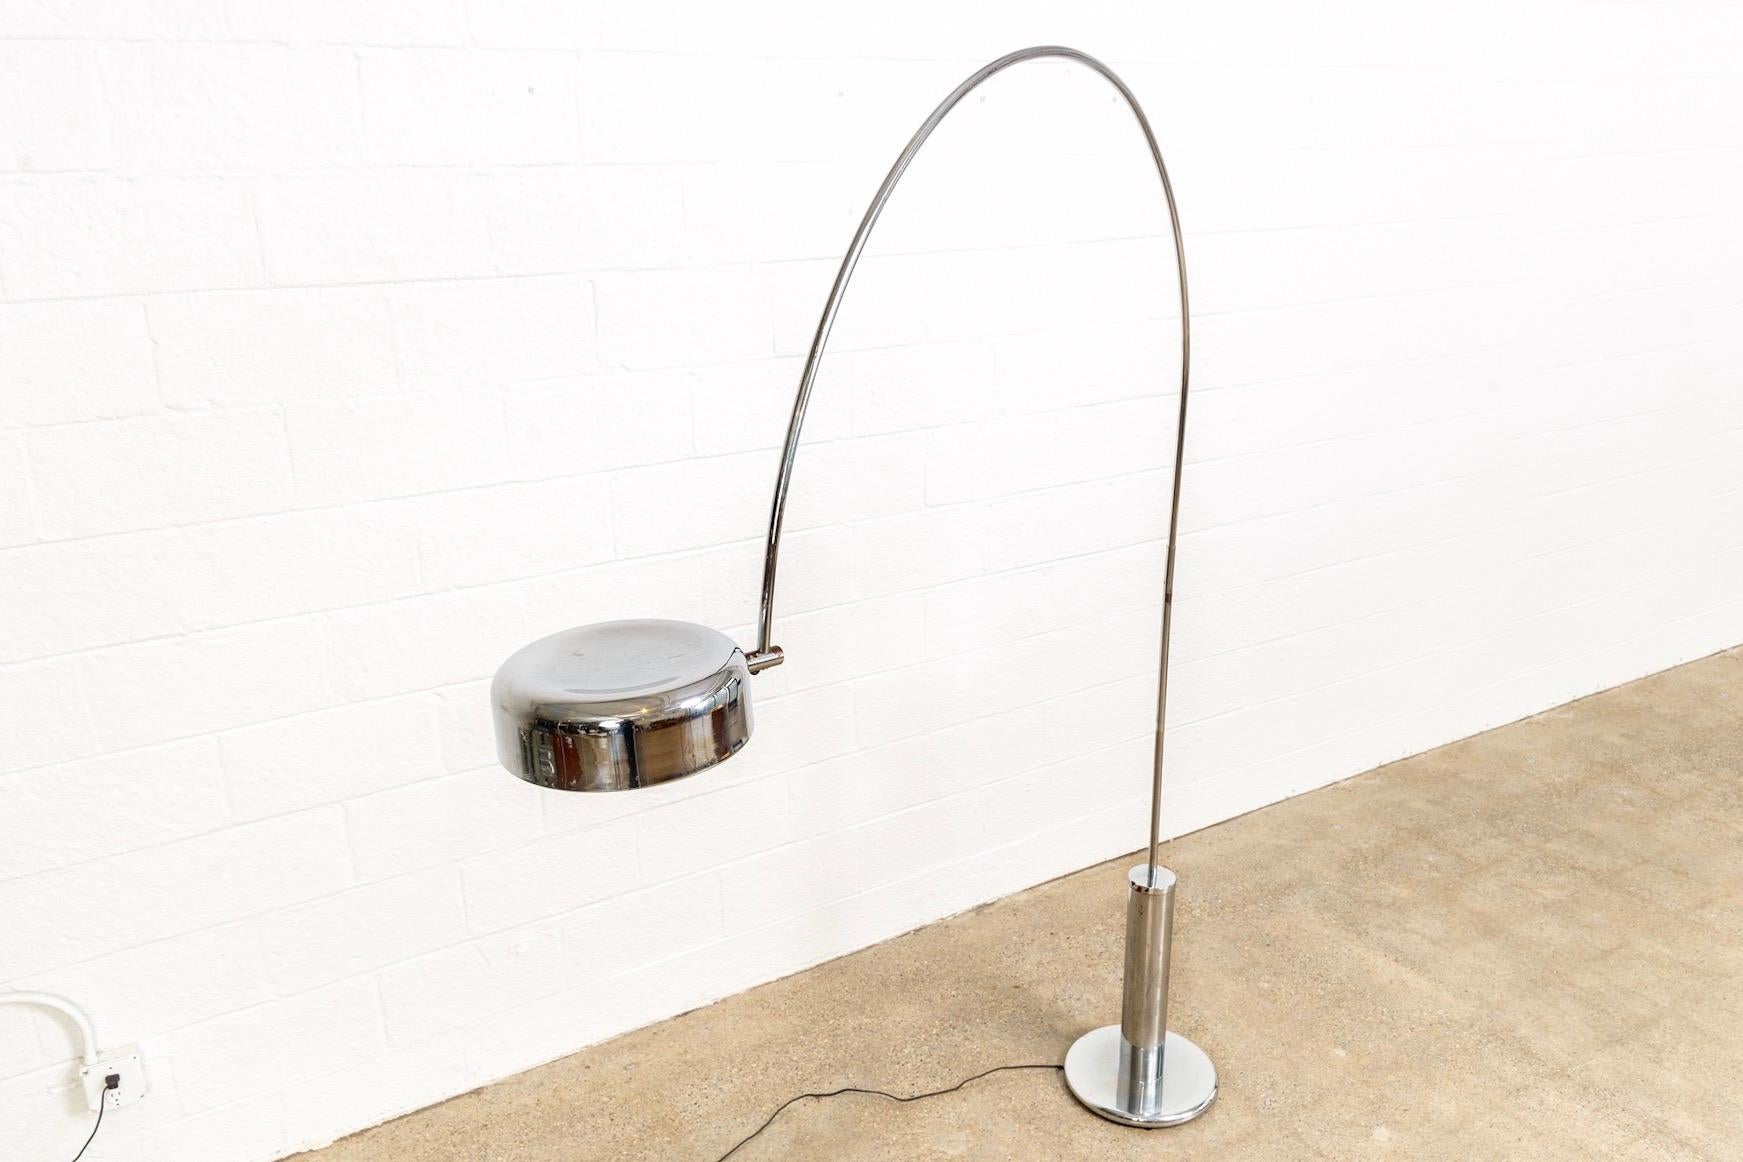 This vintage mid century modern chrome arc floor lamp is circa 1960. The sleek modernist design features an elegant arching stem on a tall tubular chrome-plated steel base and a lozenge-shaped chrome lampshade with a milky white enameled interior.